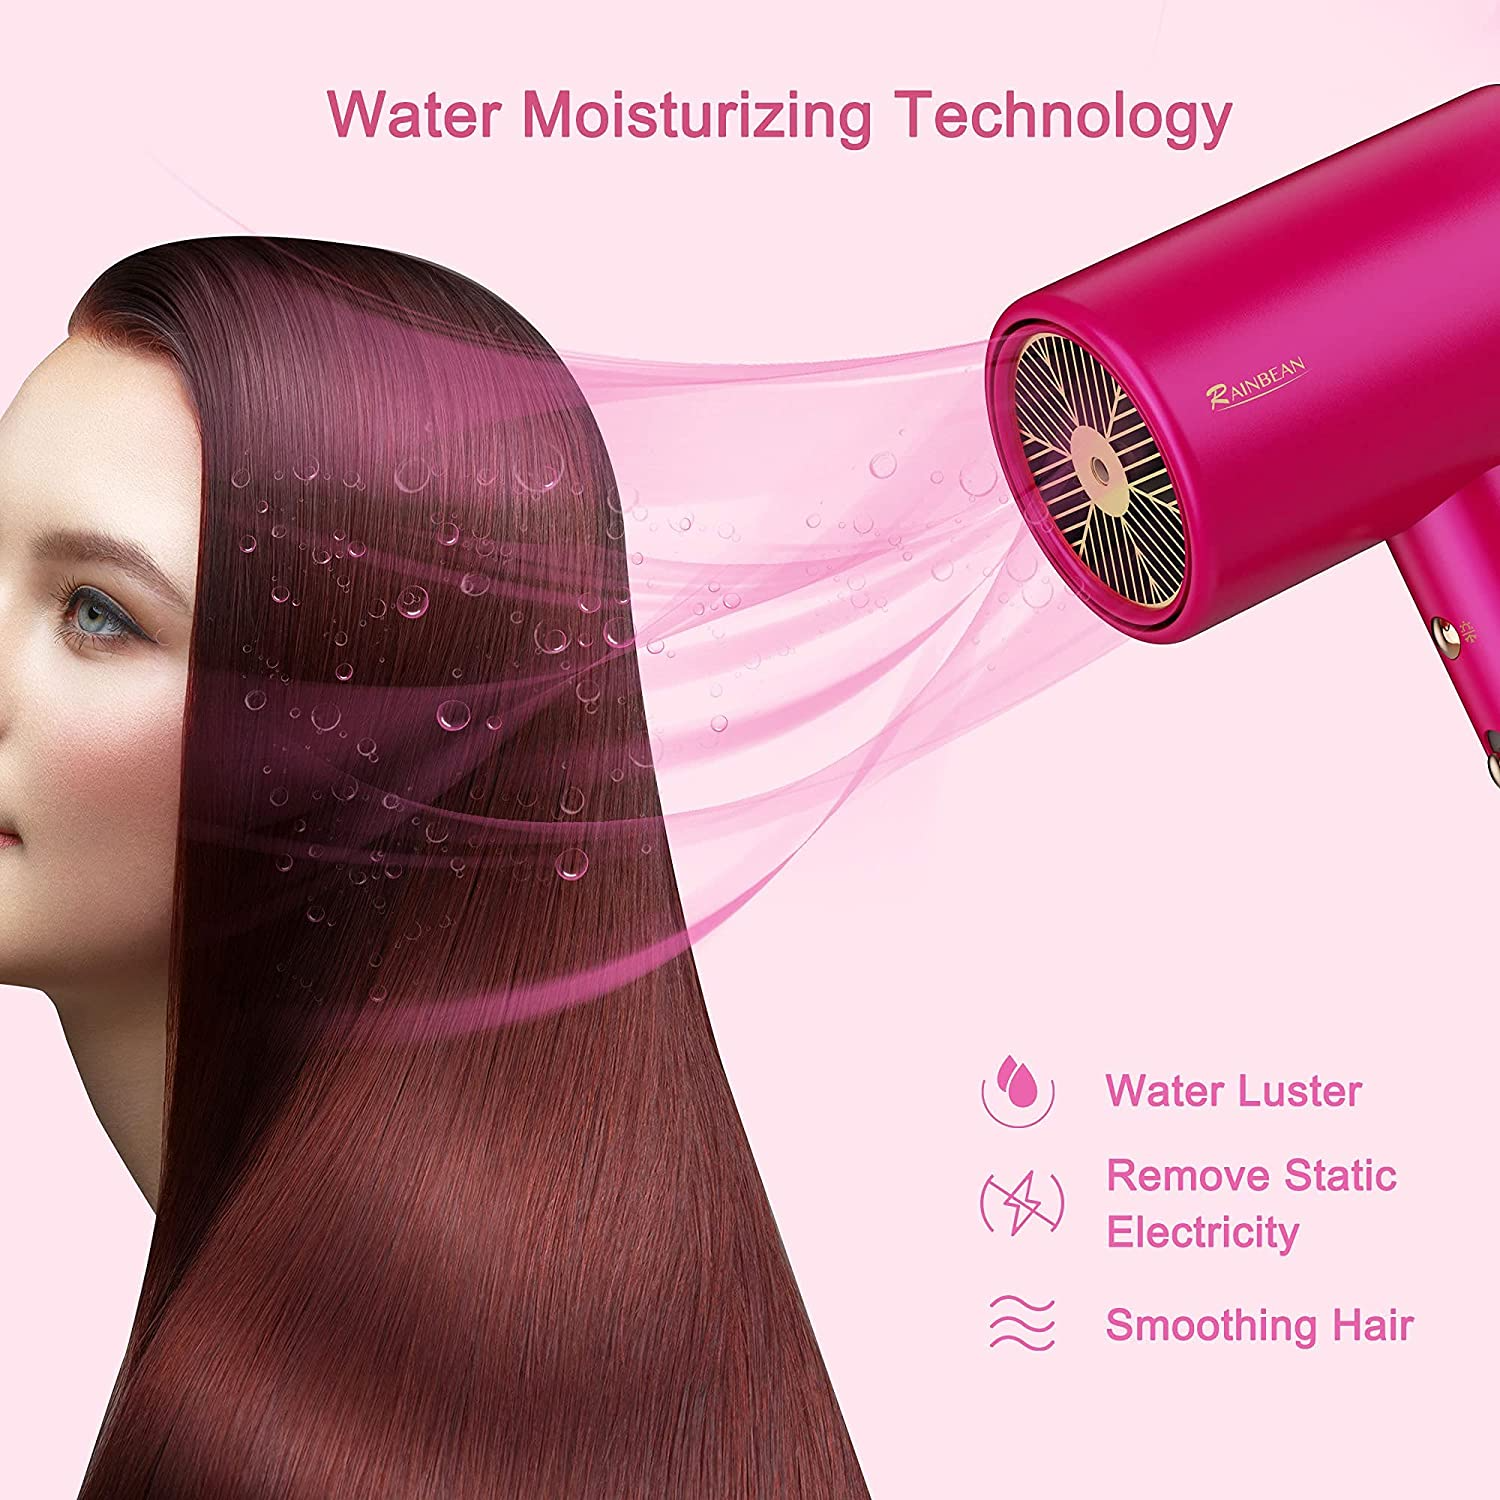 1800W Water Ionic Hair Blow Dryer - 2 Speed Magnetic Nozzle